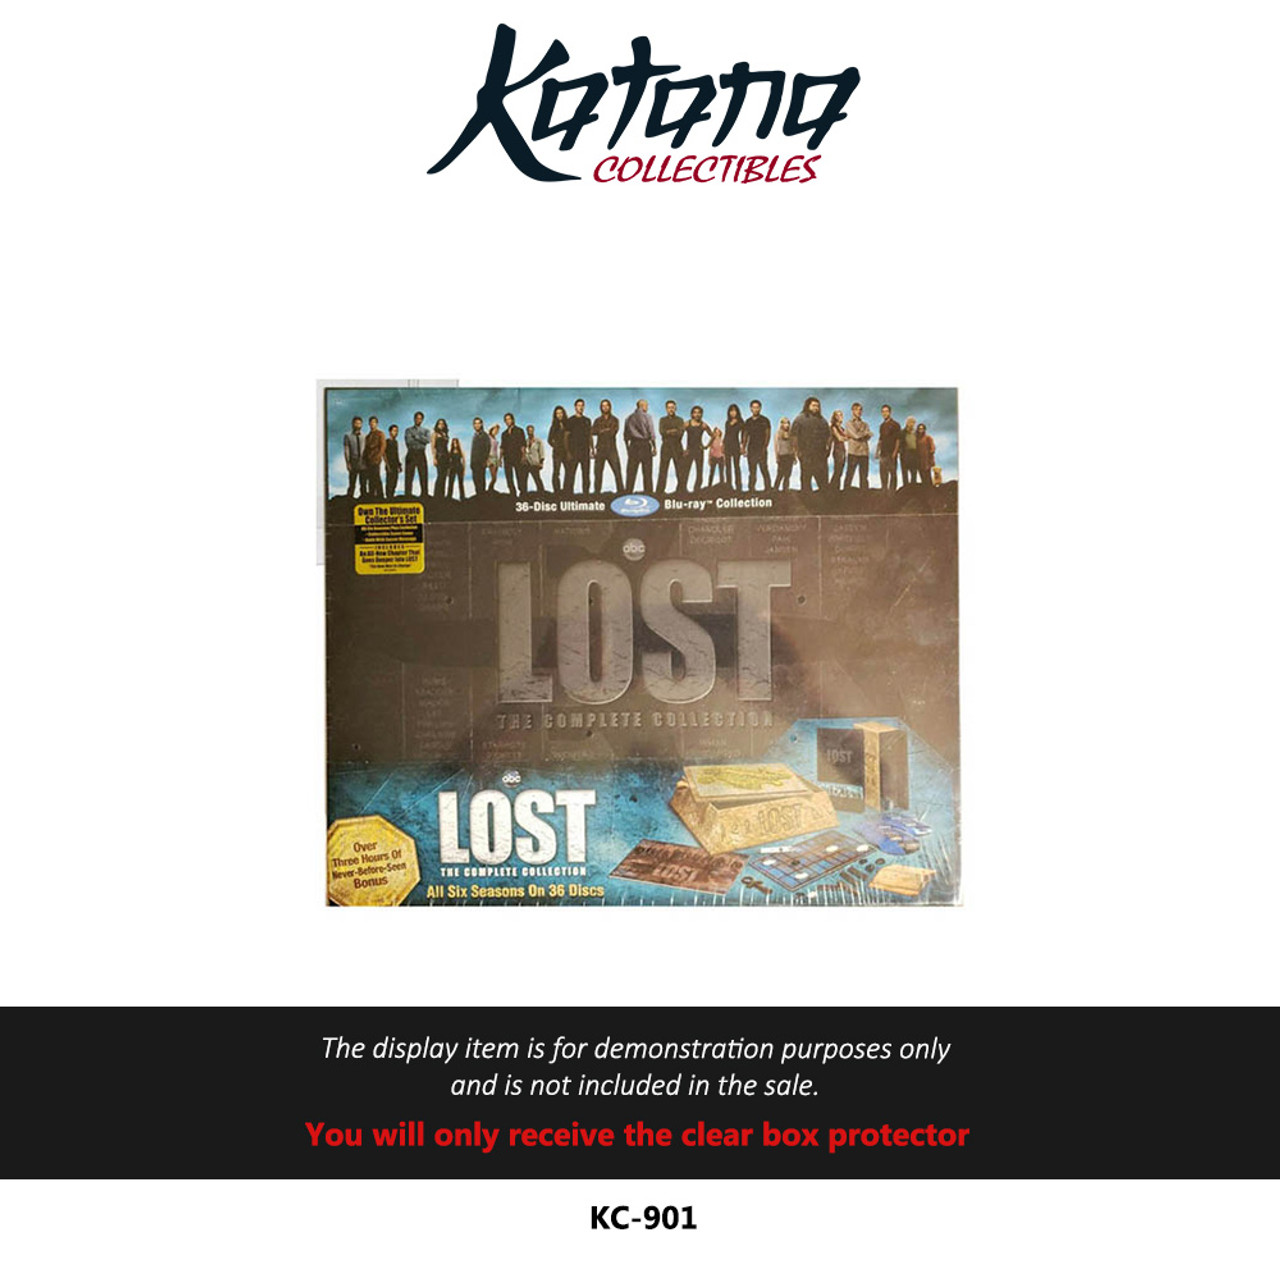 Katana Collectibles Protector For Lost: The Complete Collection Blu-ray set